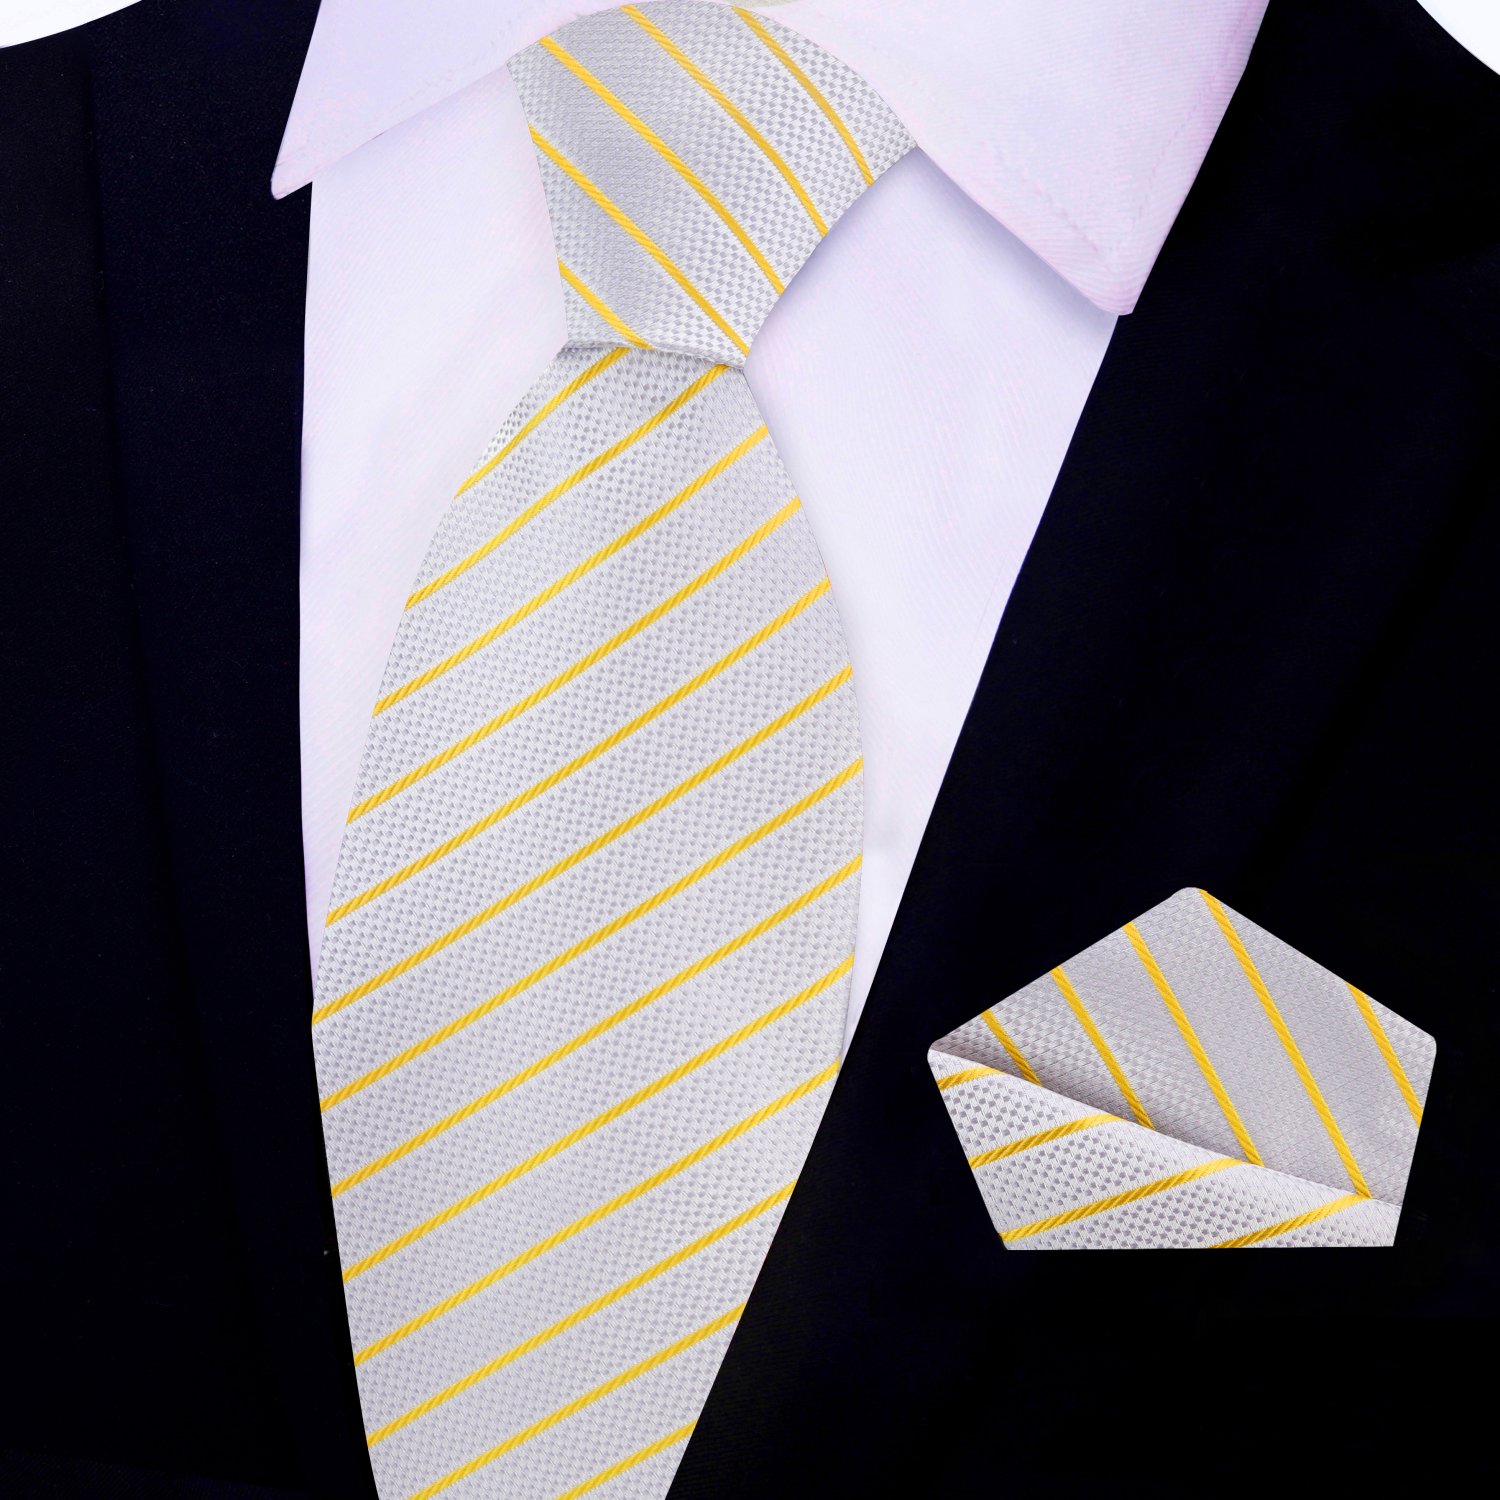 View 2 Silver and Gold Pinstripe Necktie and Square